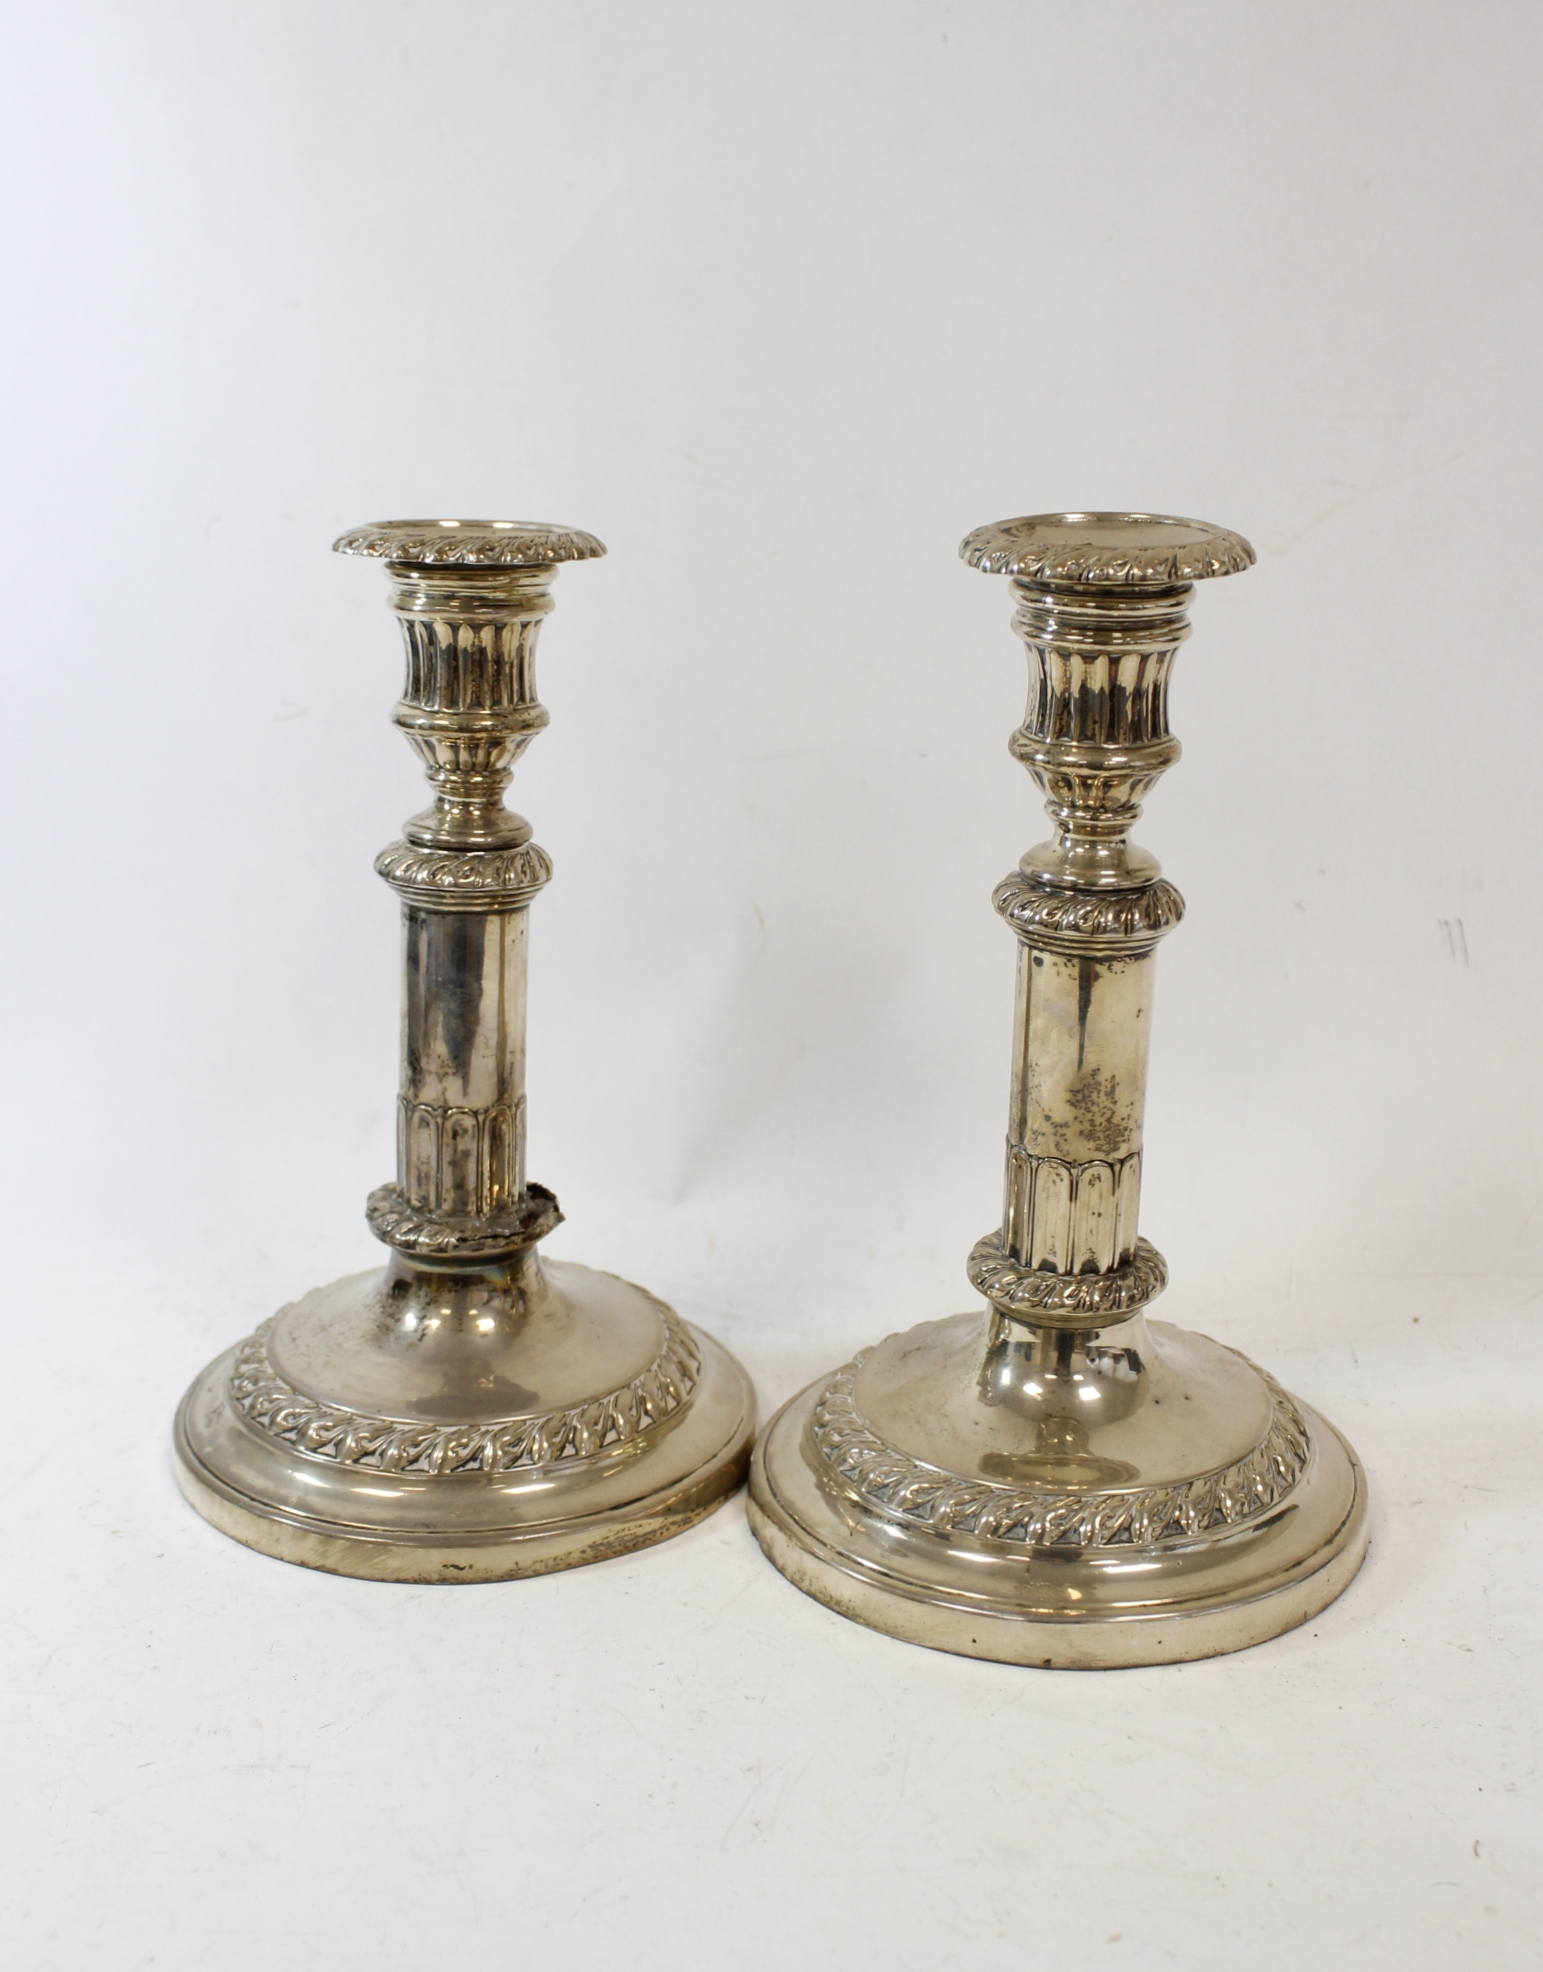 Pair of silver sliding candlesticks with foliate bands by T & J Settle, Sheffield 1819 (one a/f).